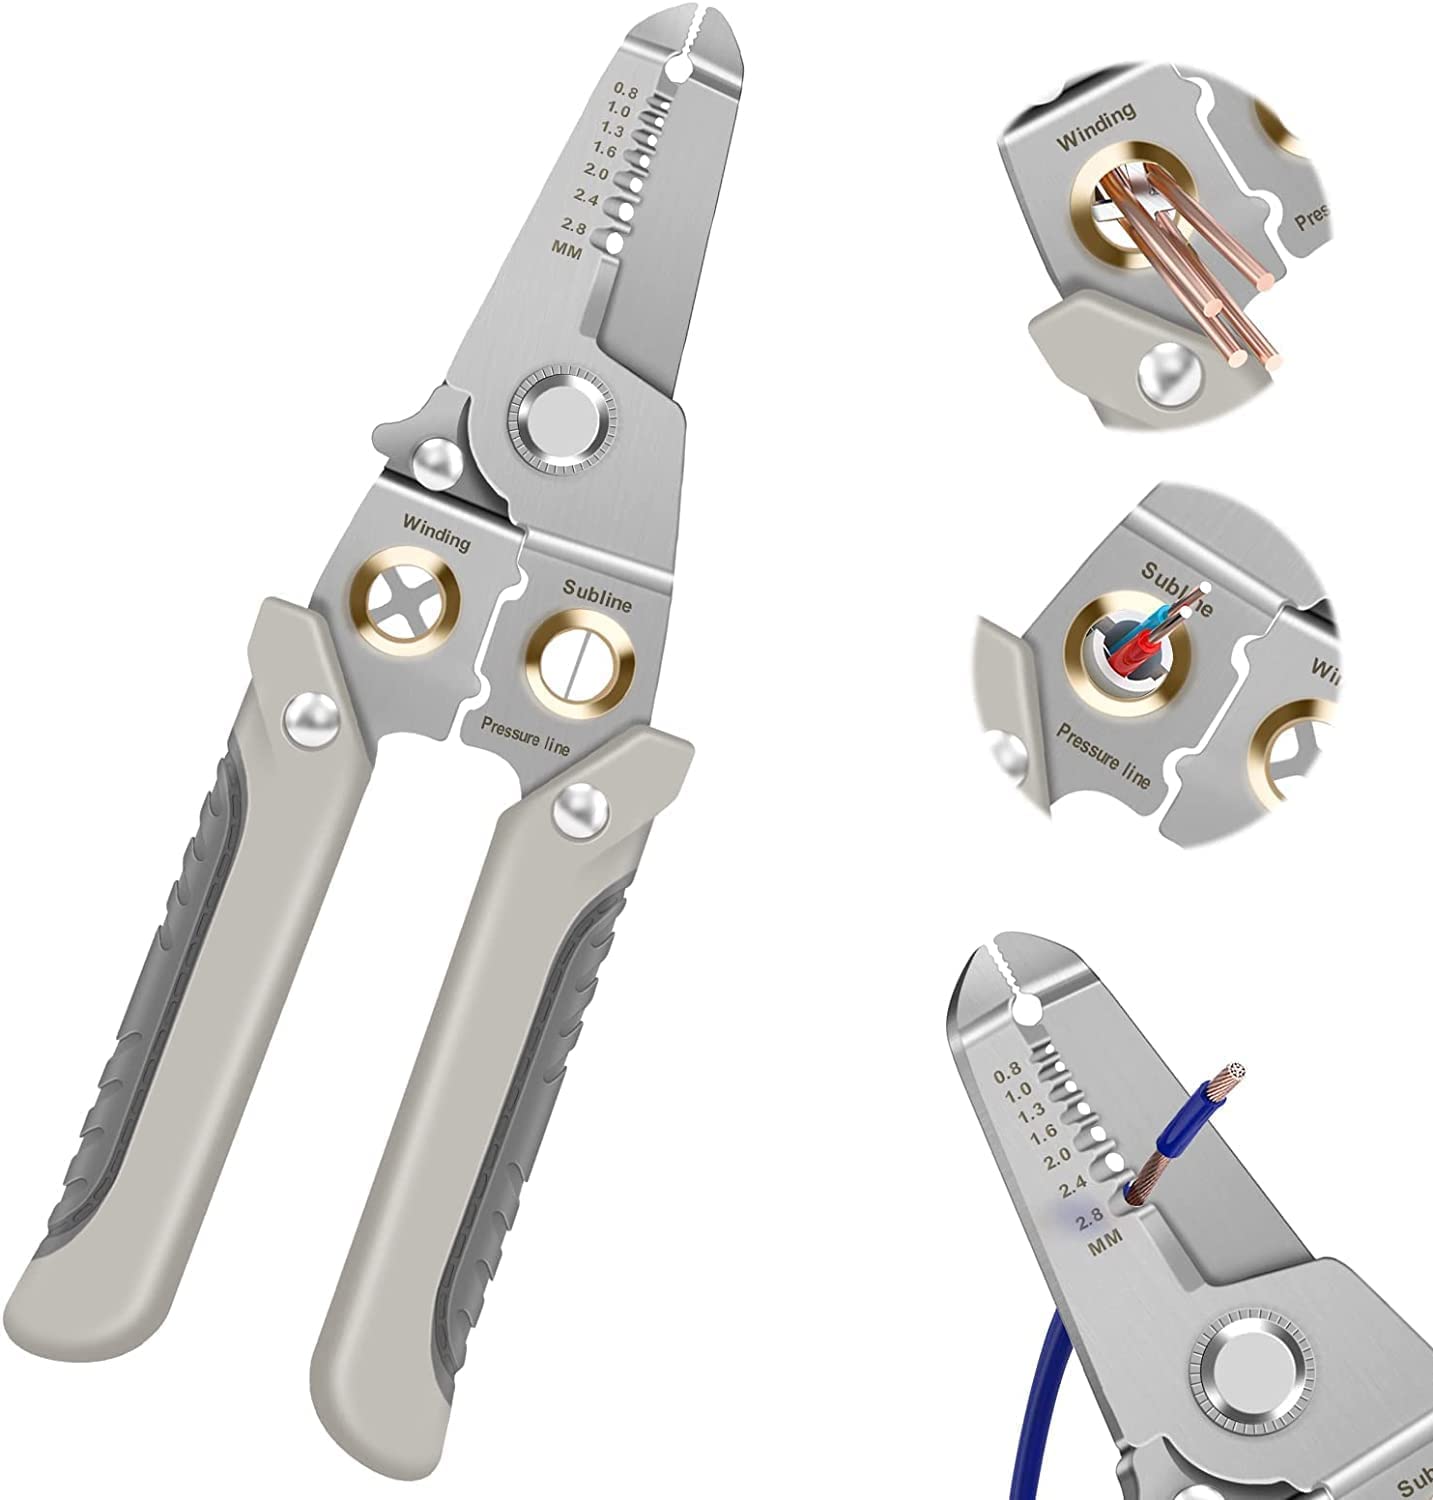 SkyShopy 6 In 1 Multifunction Electrician Wire Plier Tool || Electrical Wire Strippers Wire Splitting Pliers|| Stainless Steel Electrical Stripping Tool || Cable Stripping Cutting and Crimping